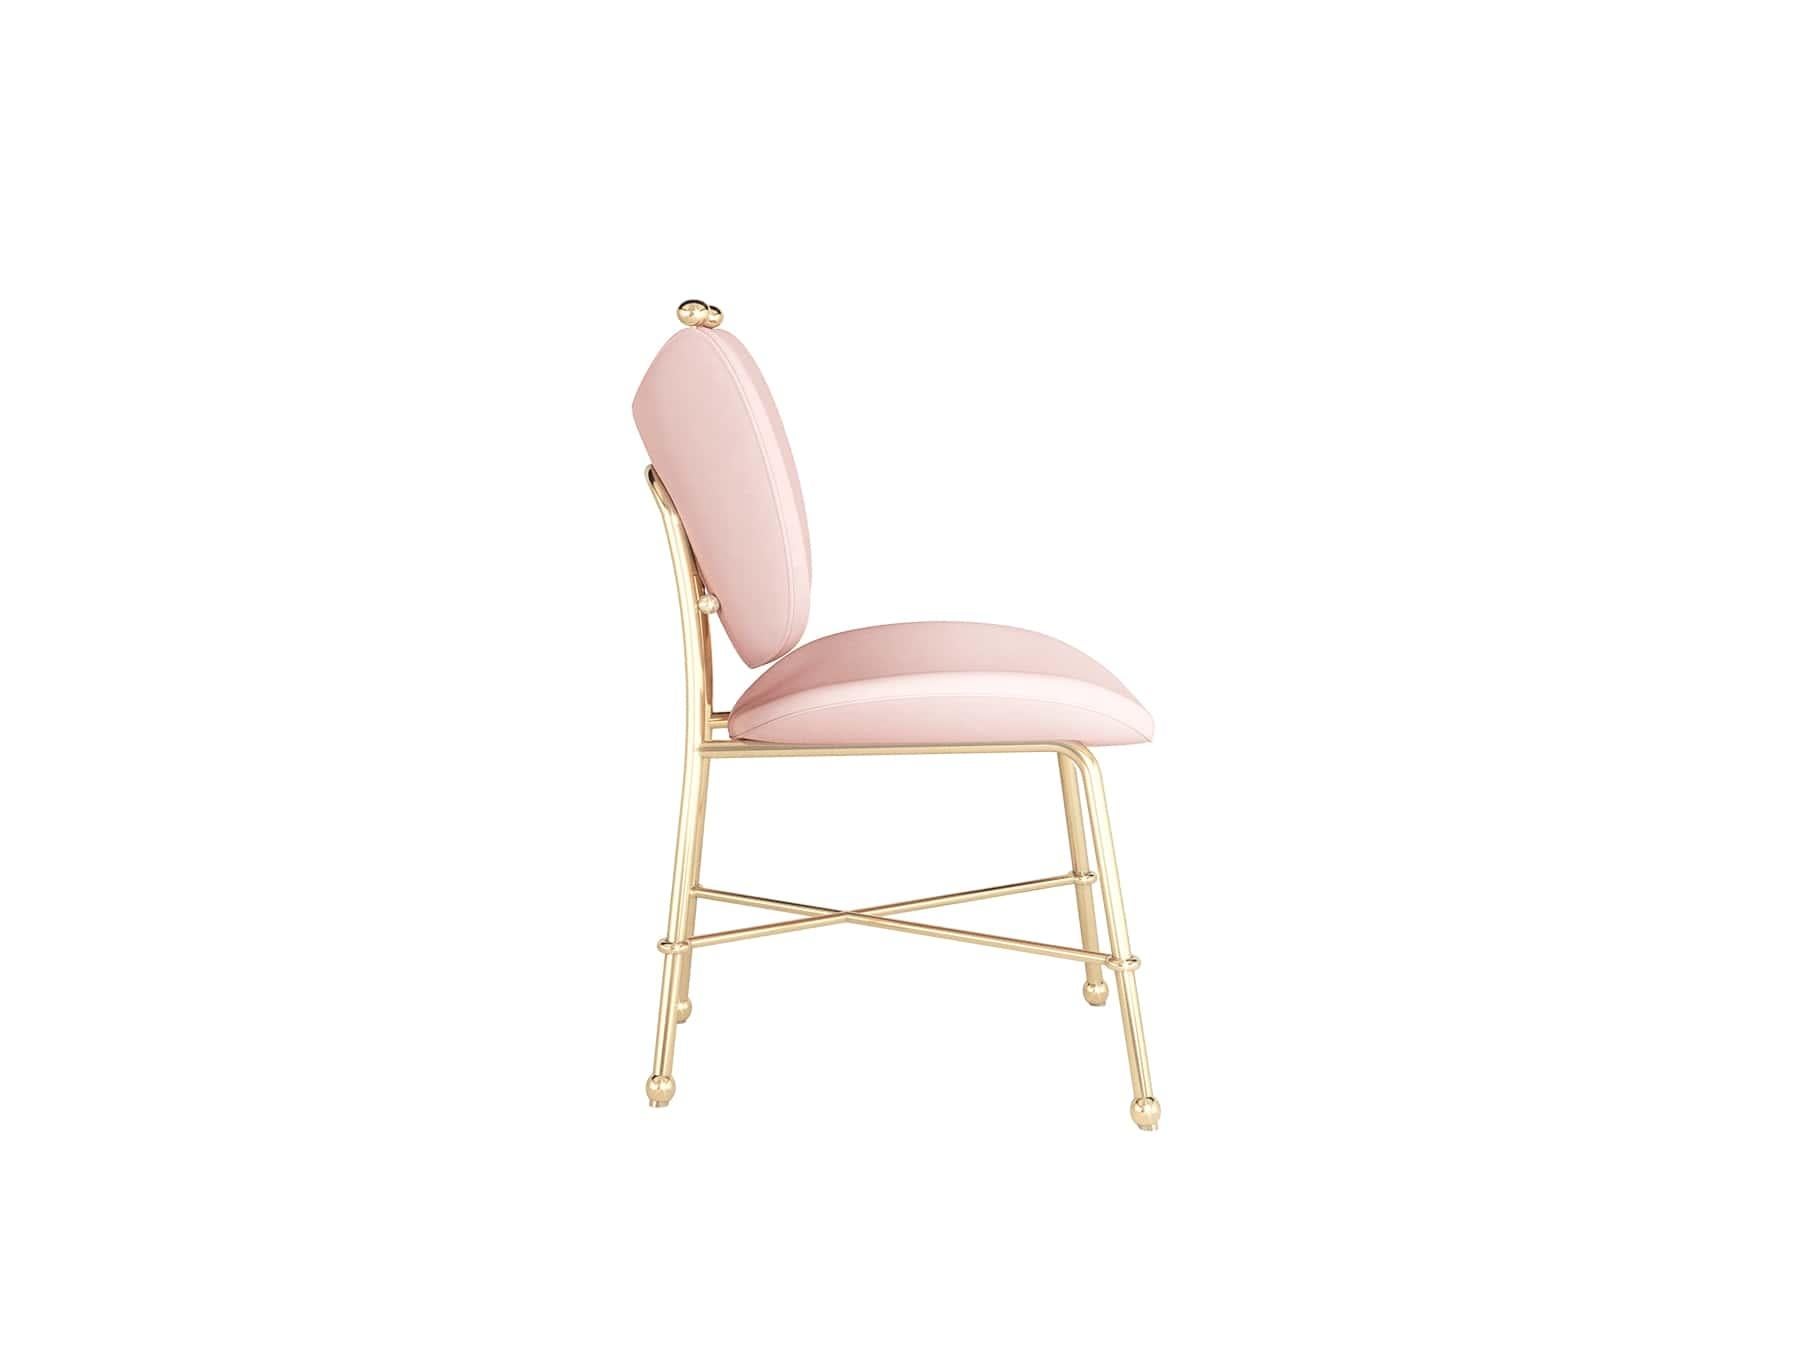 Portuguese Mid-Century Modern Style Dining Chair in Pink Velvet  and Gold Stainless Steel For Sale